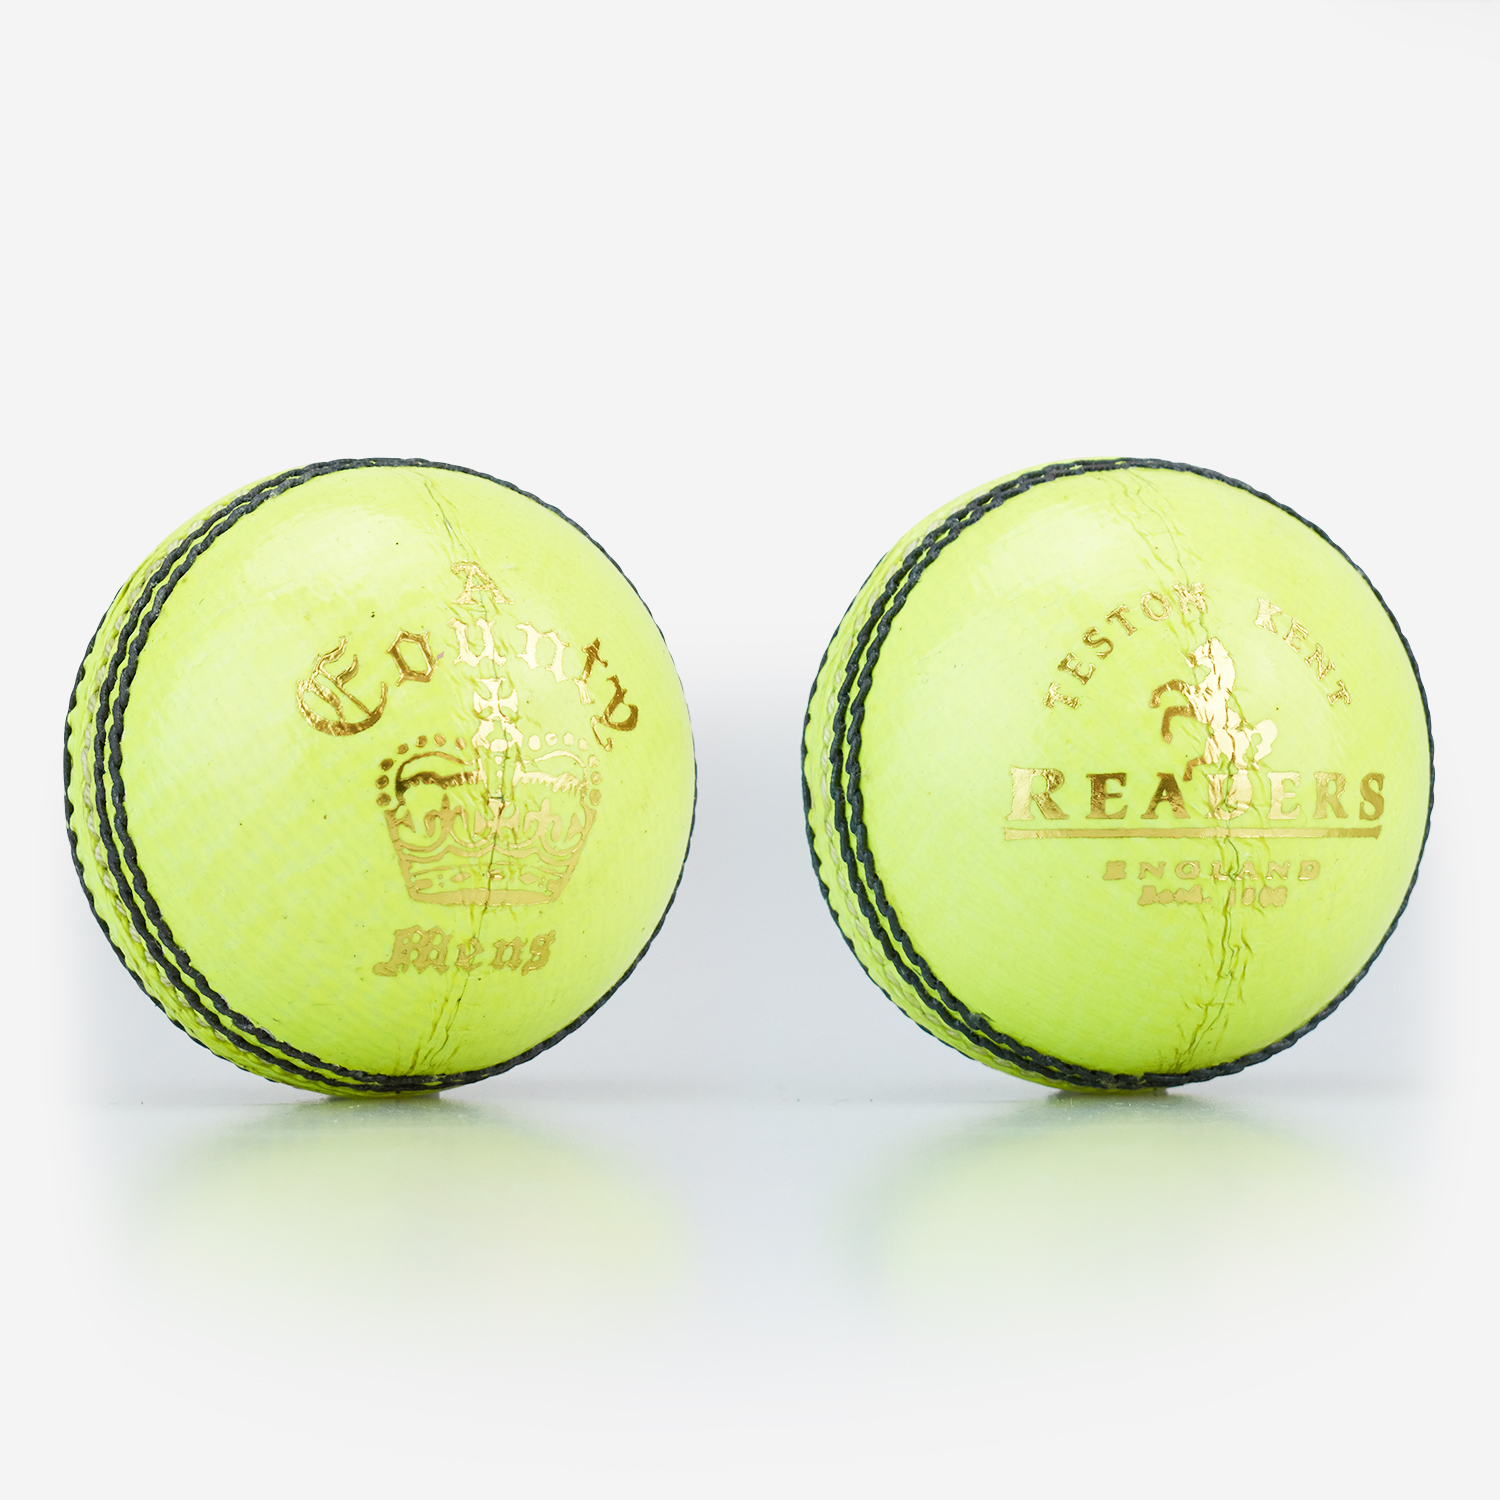 Readers County Crown Yellow Cricket Ball 